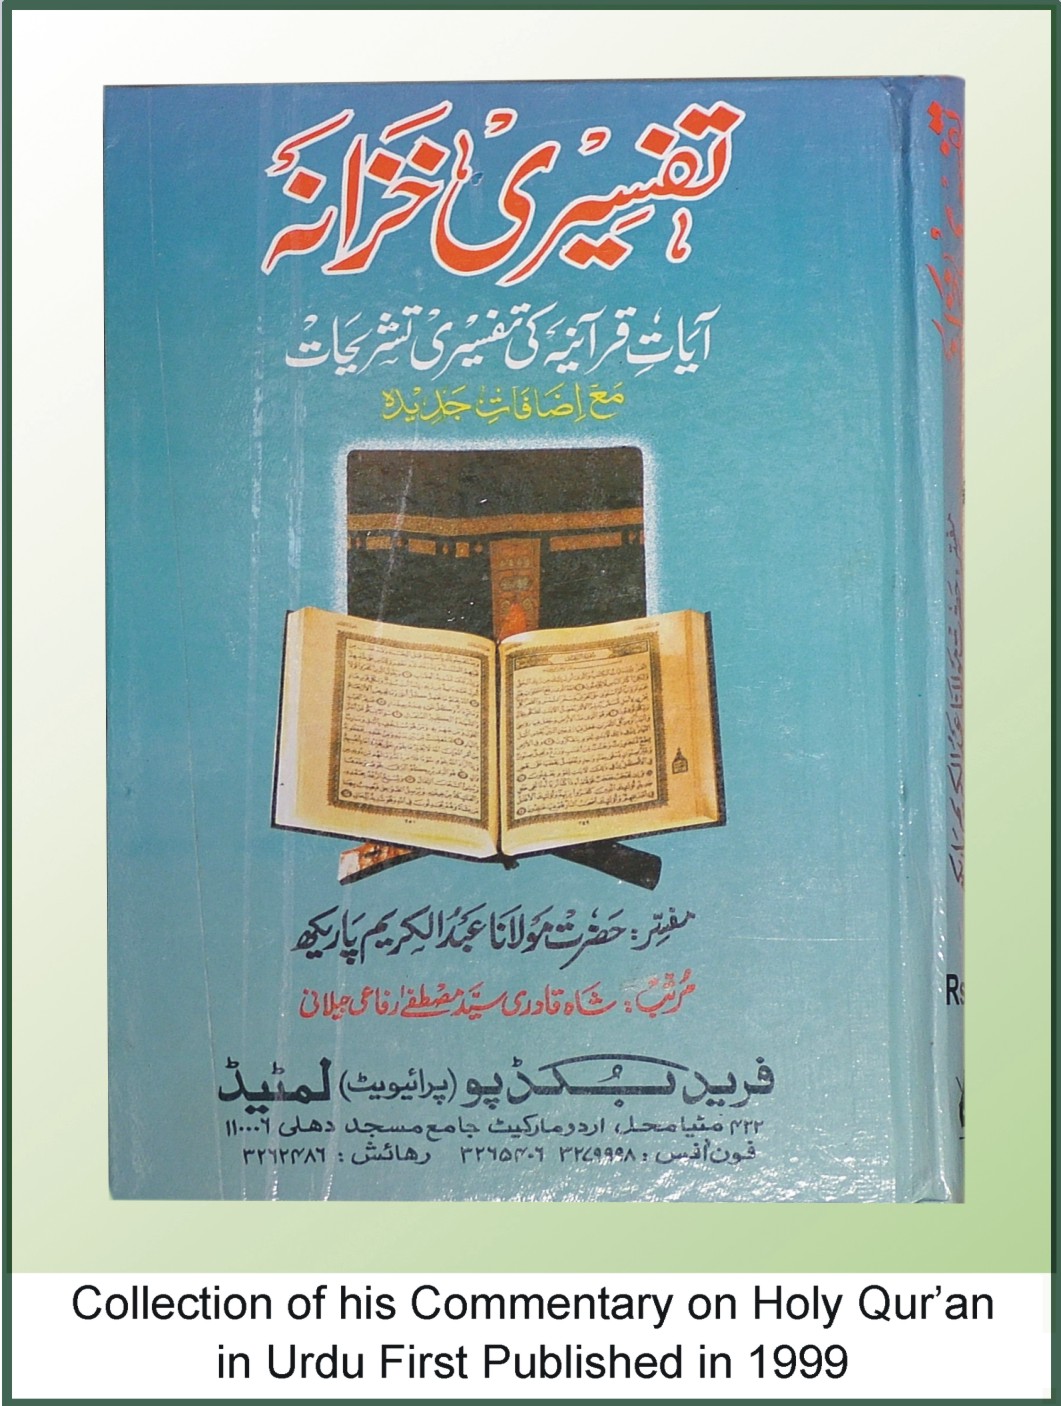 Collection of his Commentary on The Holy Qur'an (Urdu) First Published in 1999